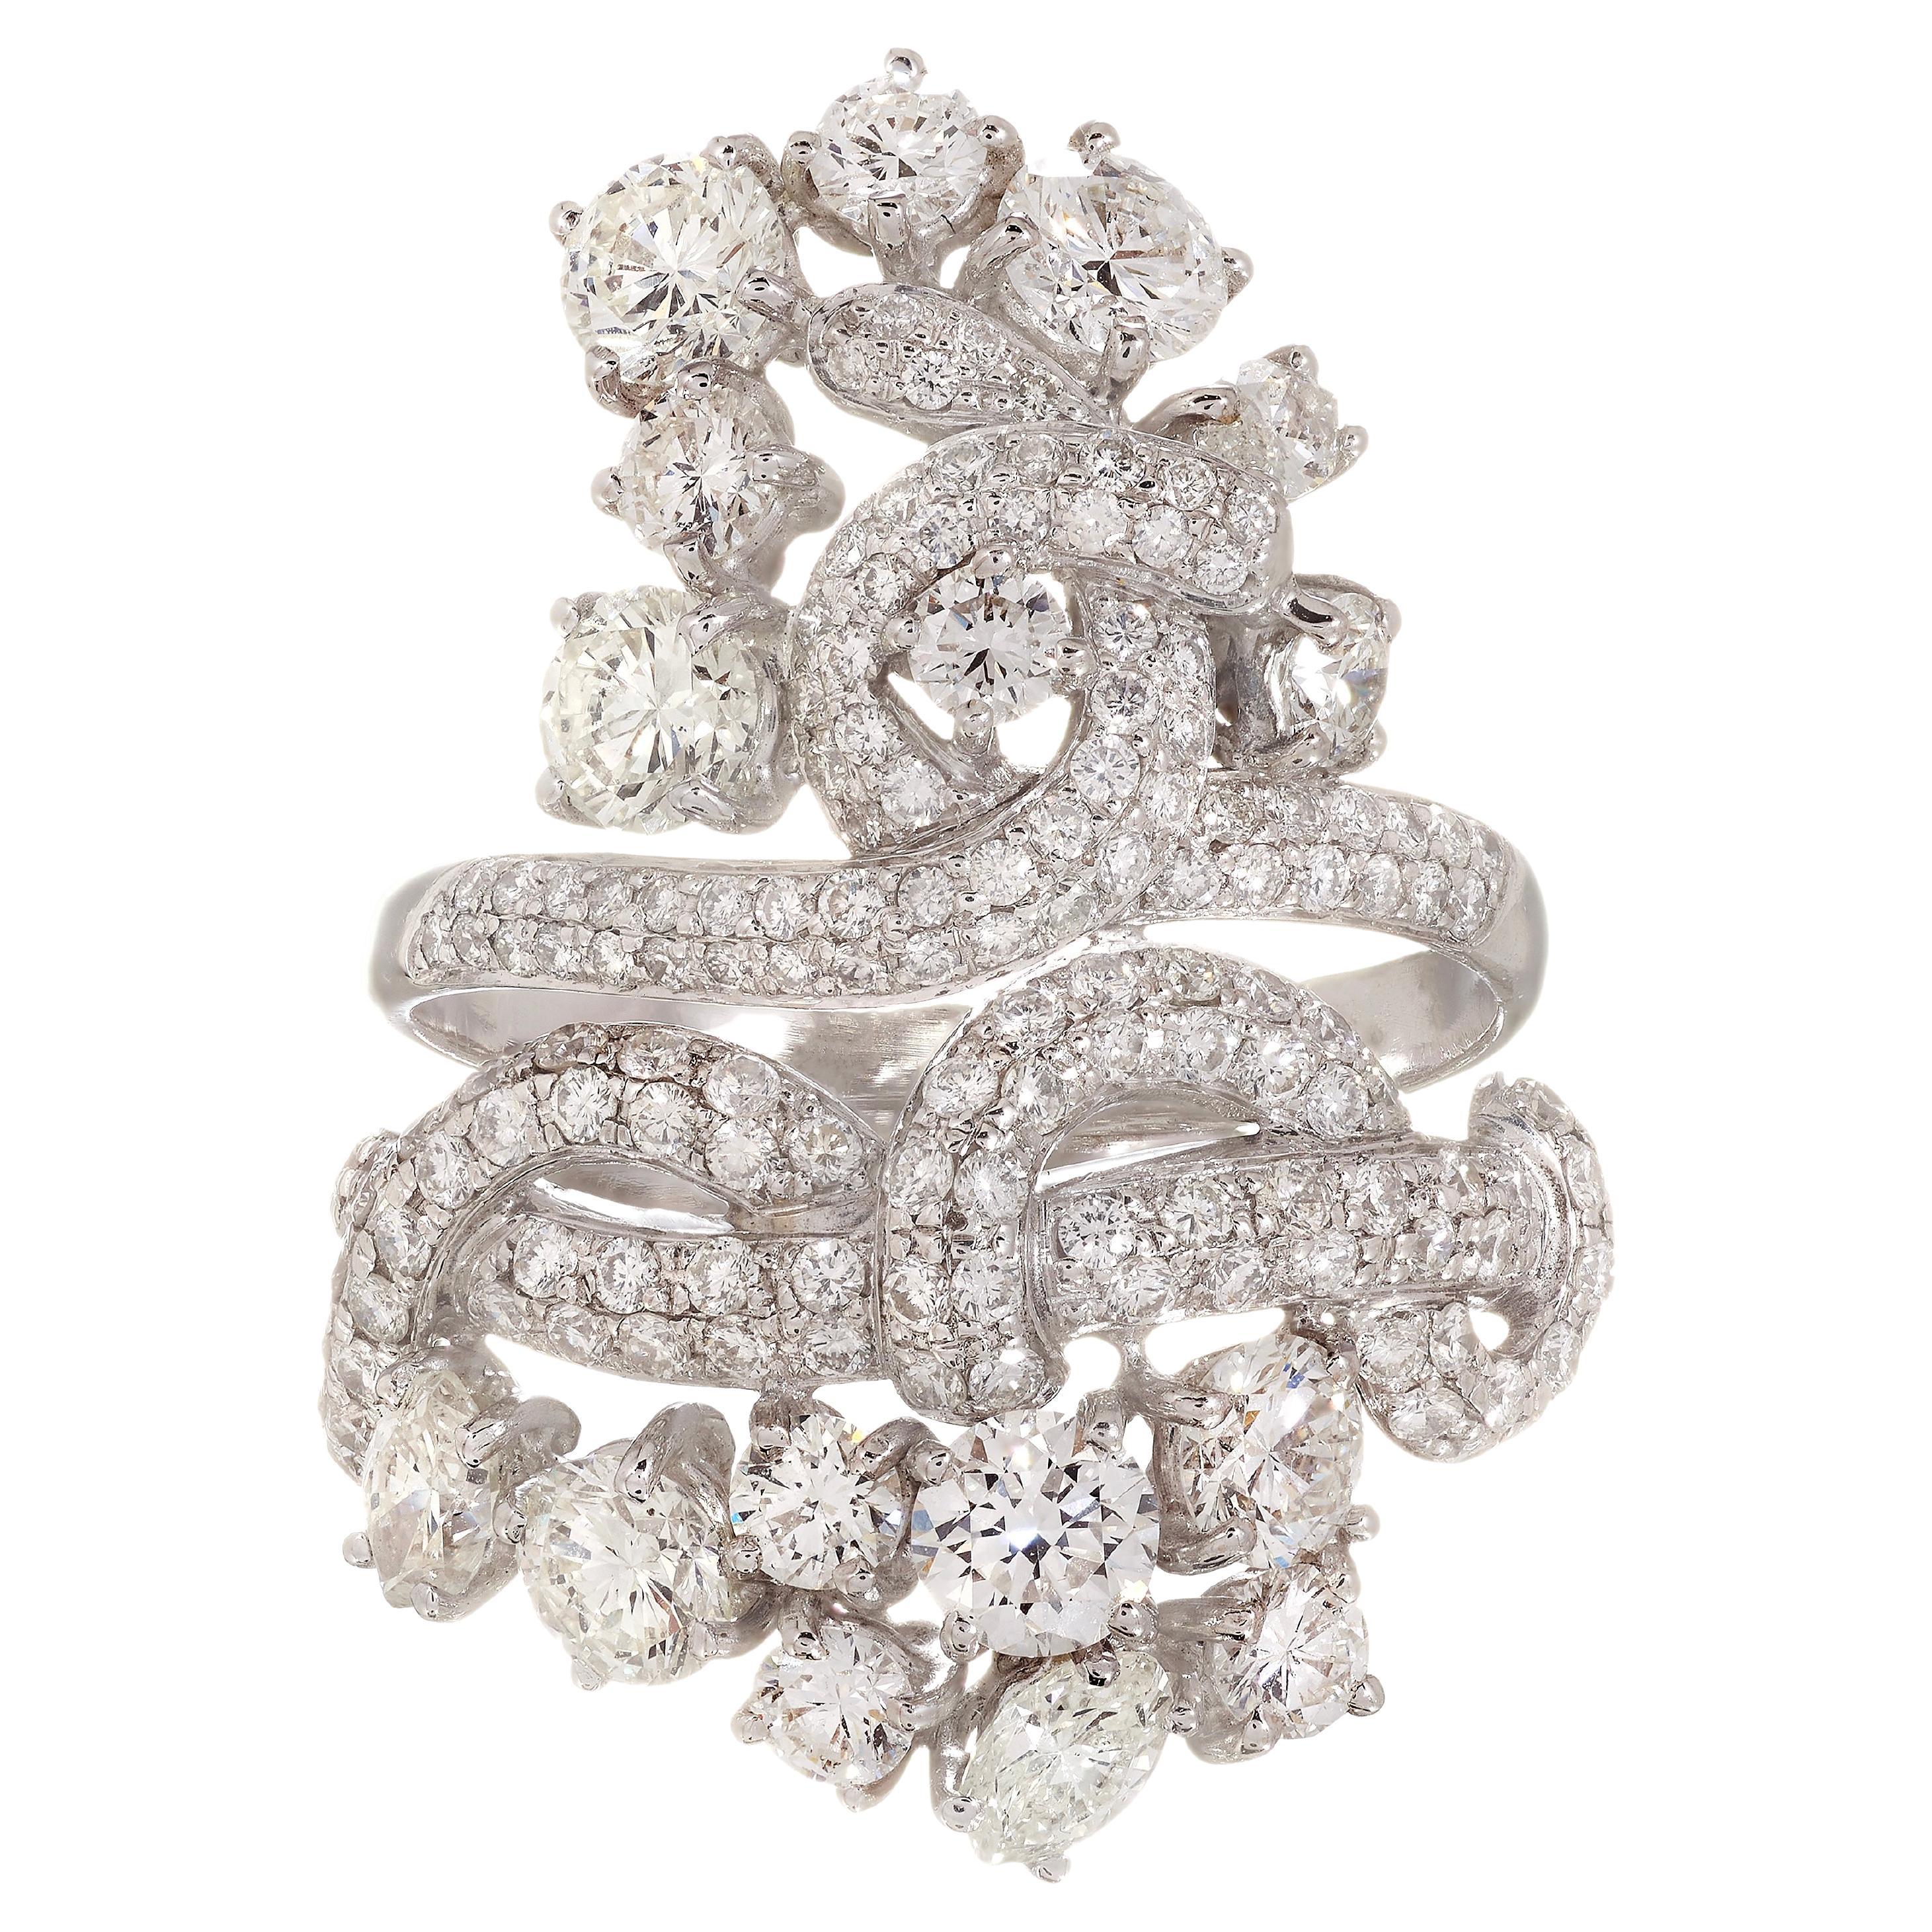 Rosior one-off Round Cut Diamond Cocktail Ring set in White Gold and Platinum 